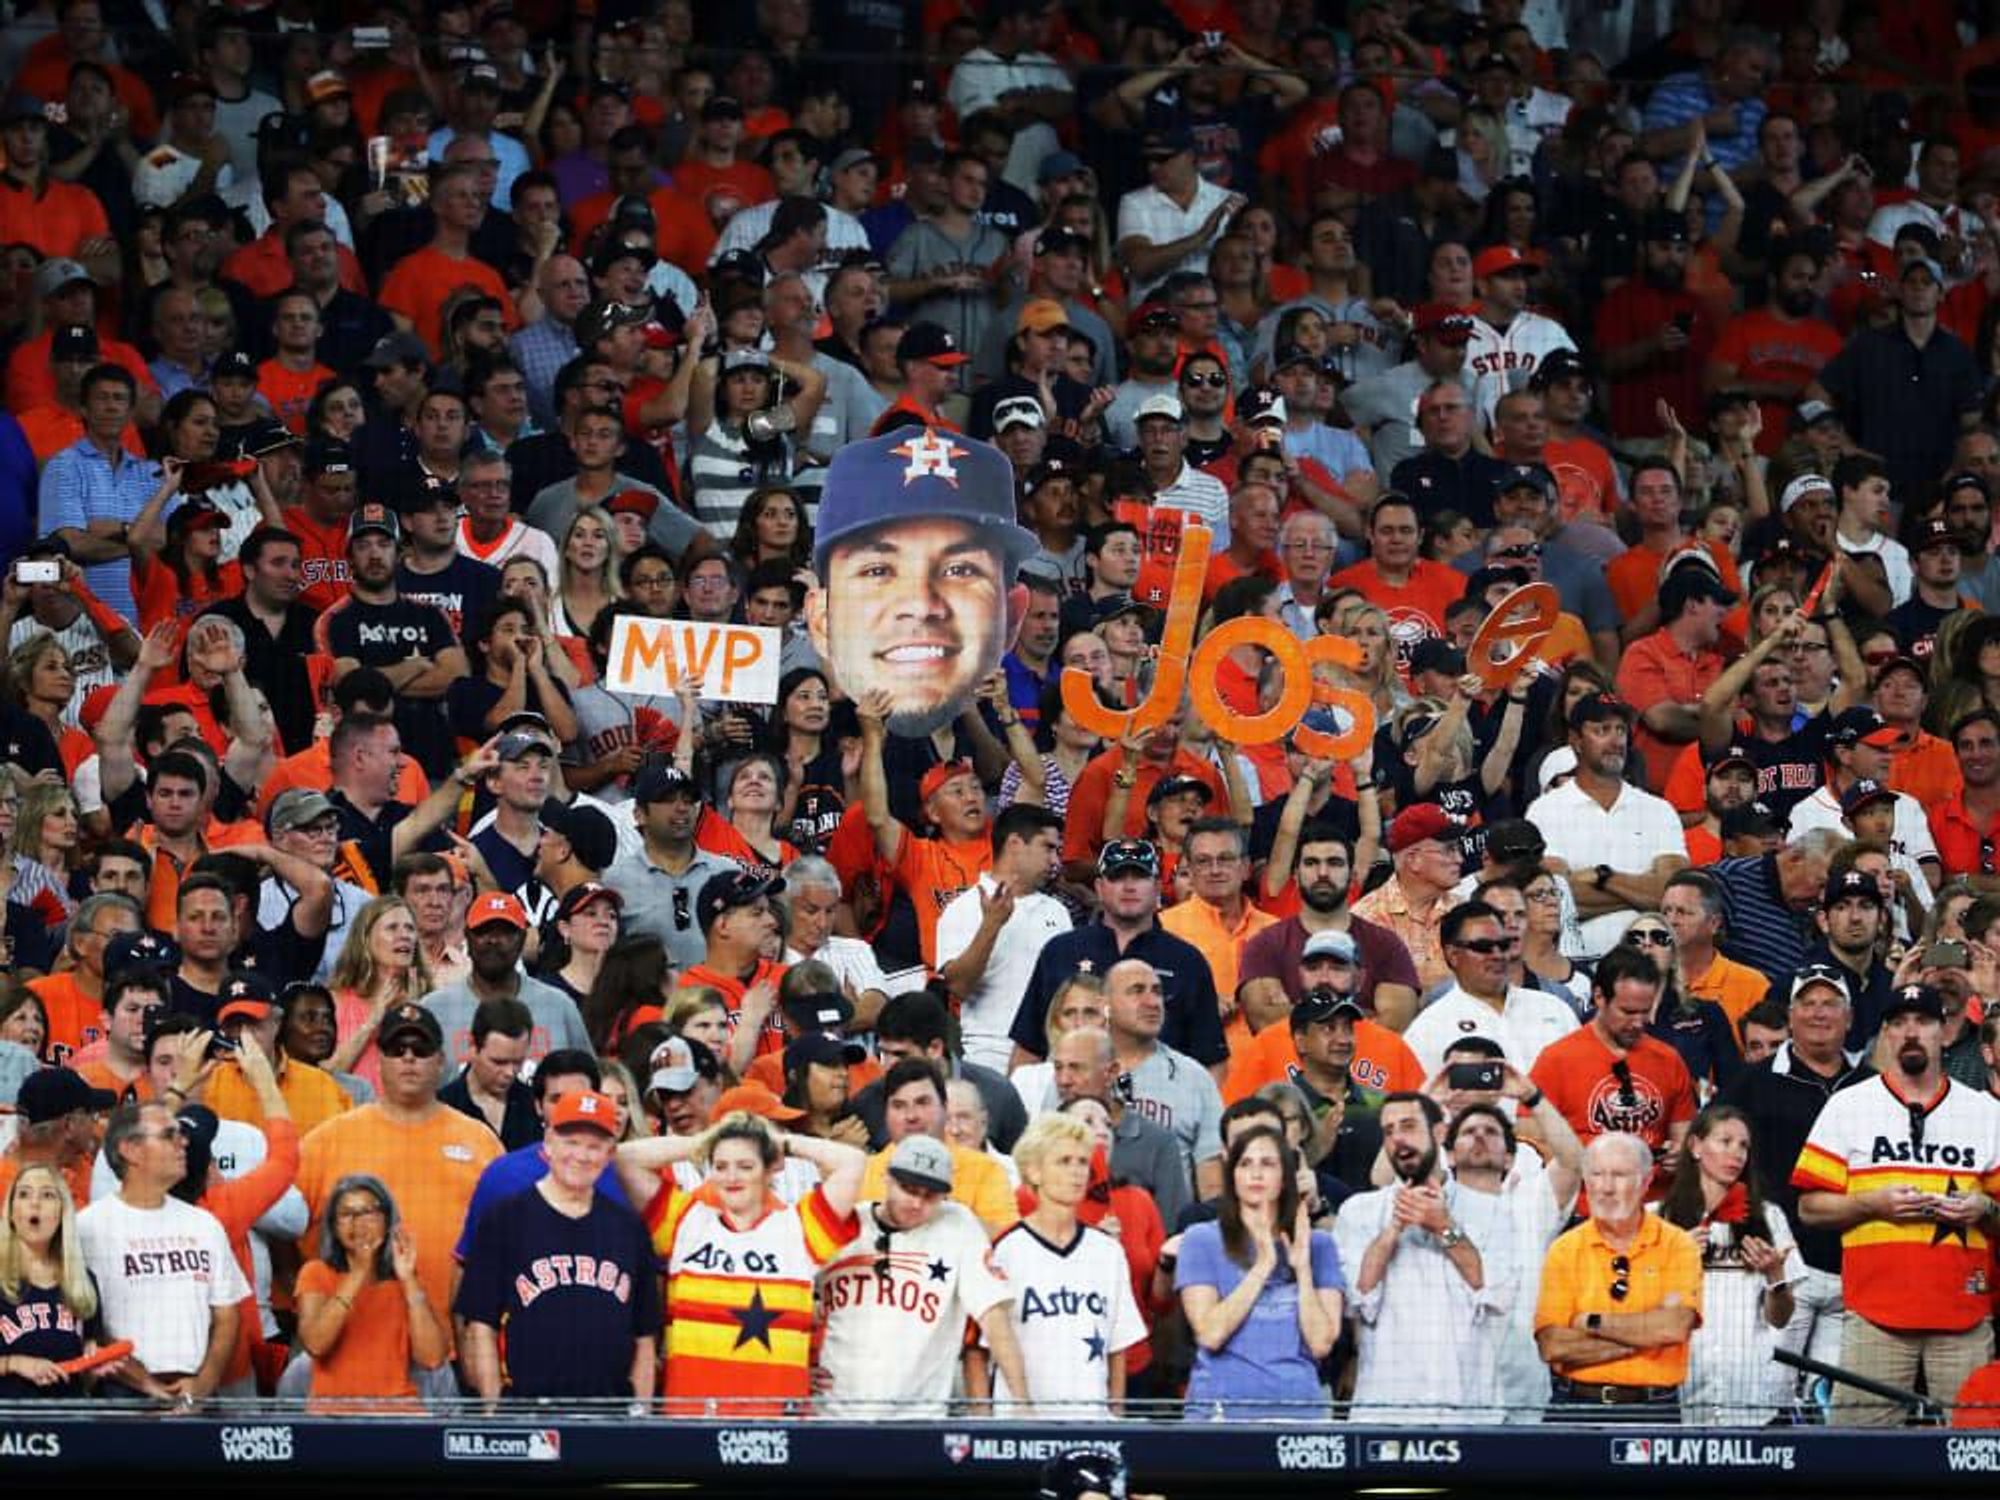 Crowd at Houston Astros ALCS game against New York Yankees